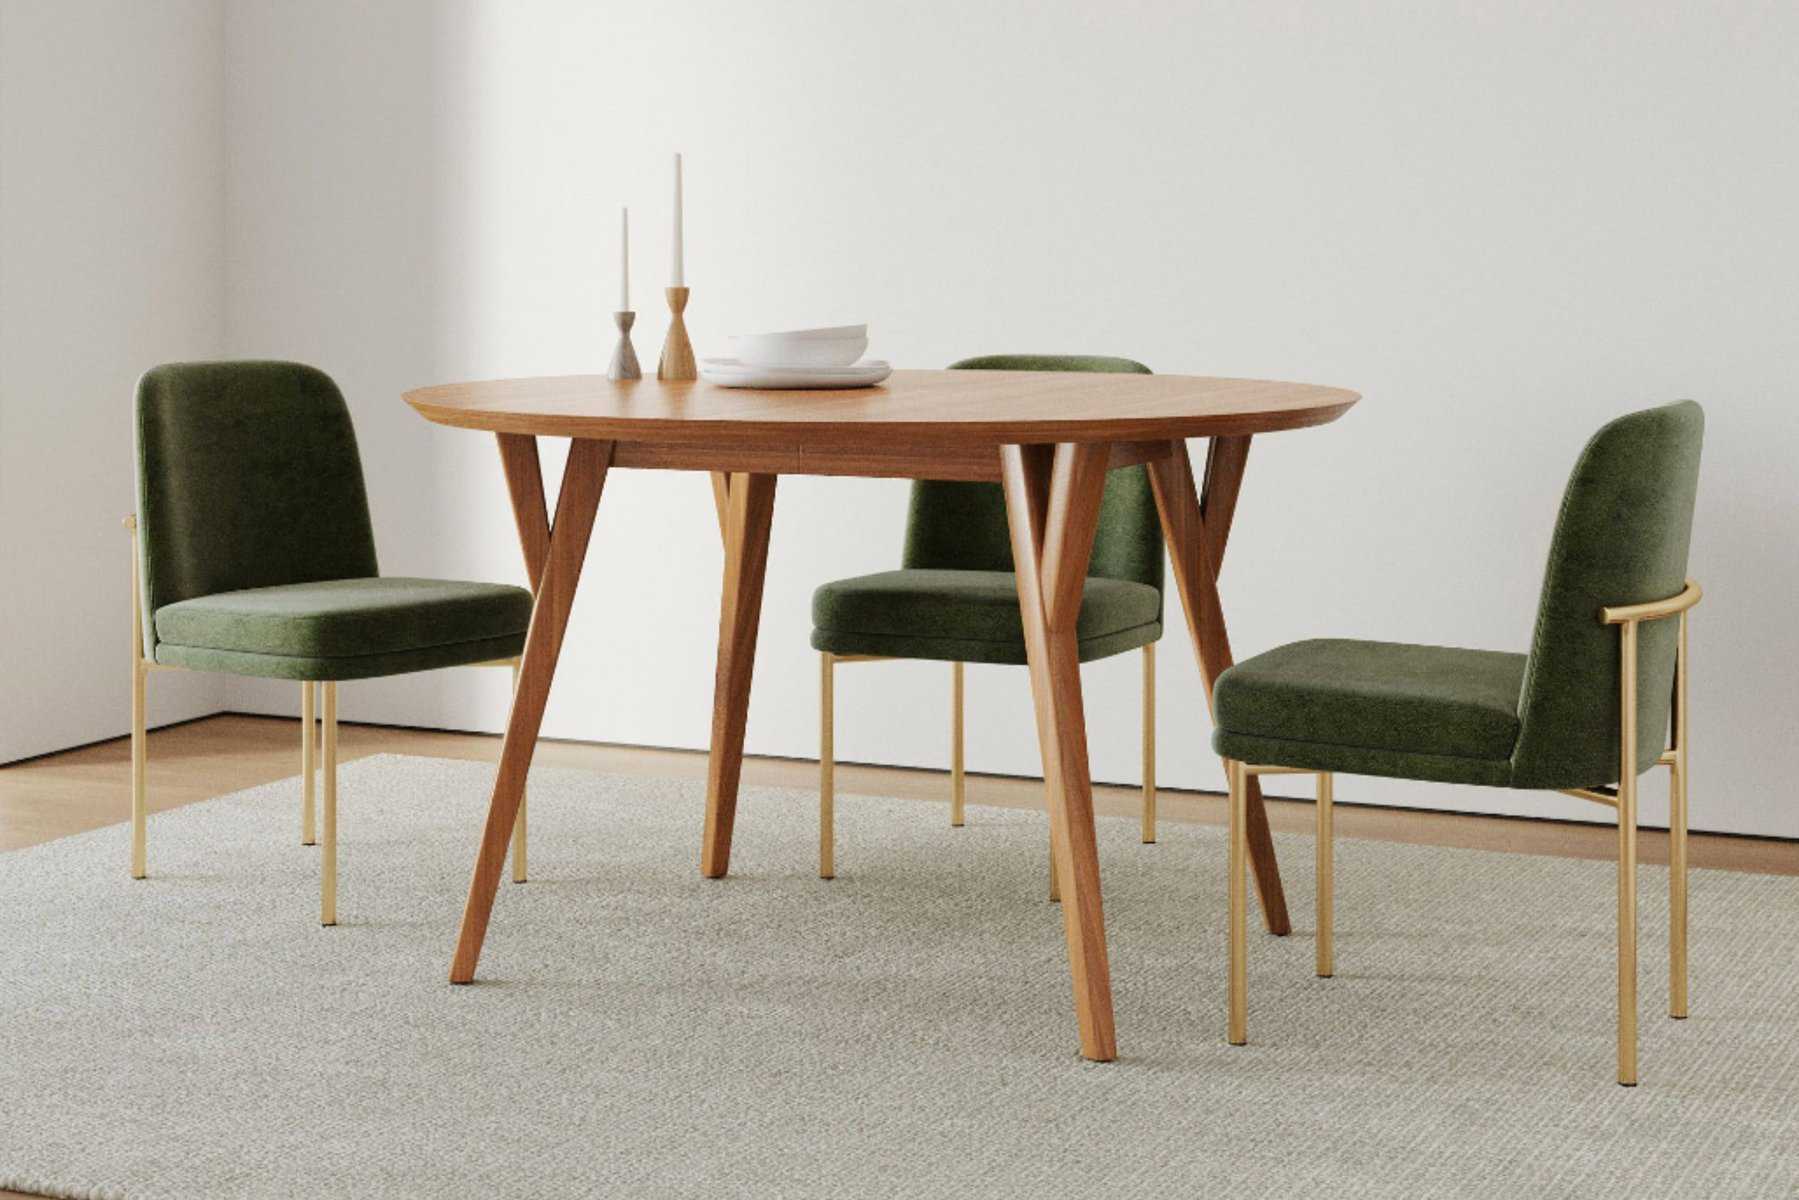 dining sets for small spaces, modern wood table with green velvet chairs